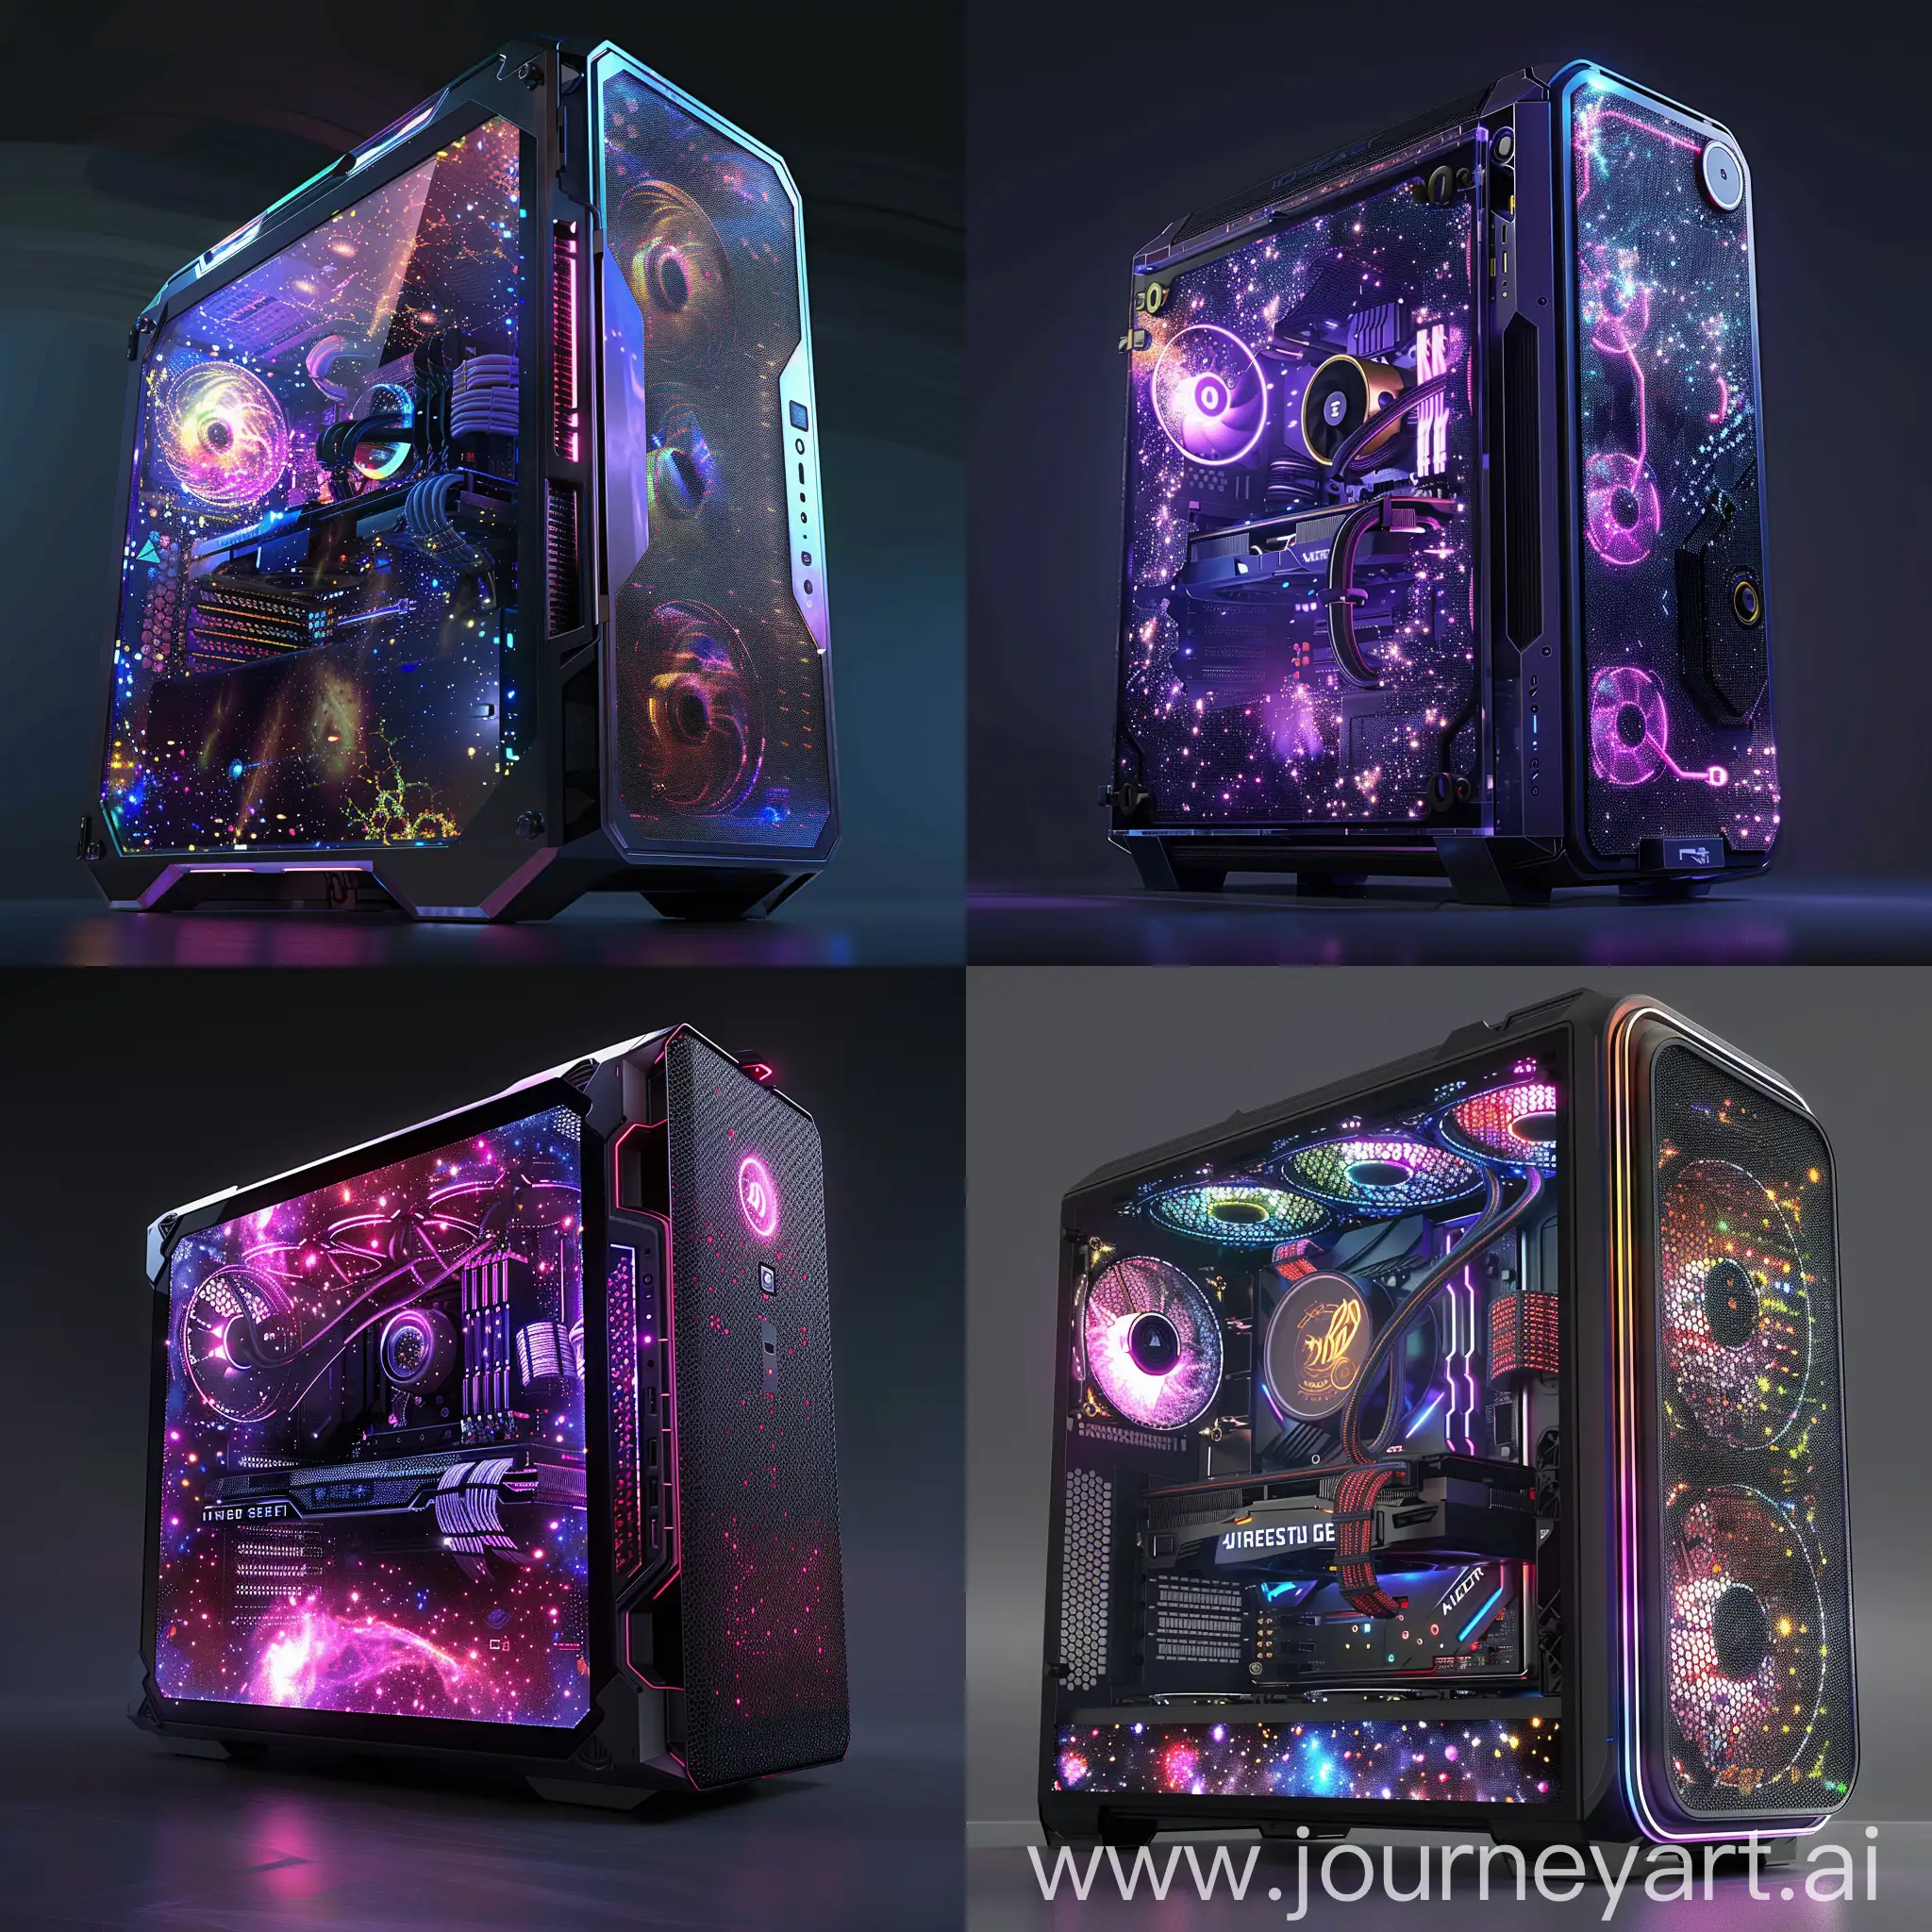 Futuristic-HighTech-PC-Case-with-Biometric-Authentication-and-Holographic-Displays